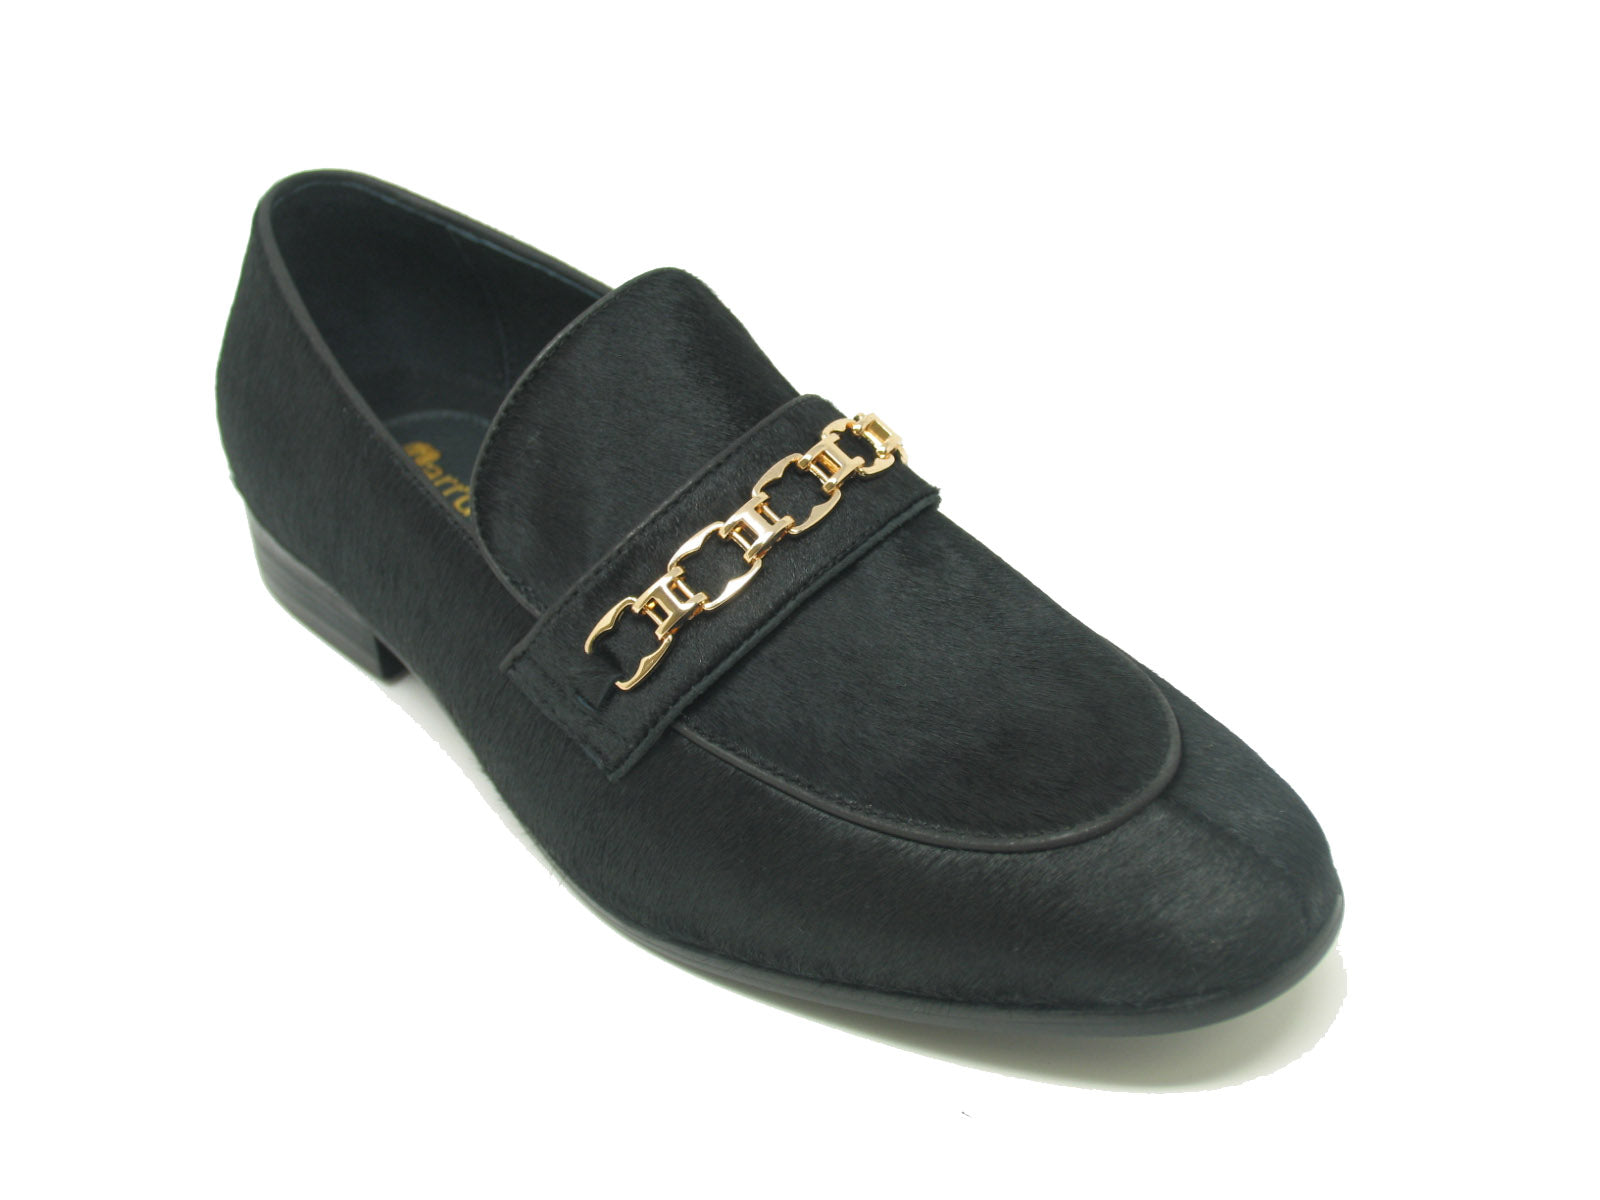 Carrucci Animal Print Buckle Loafer